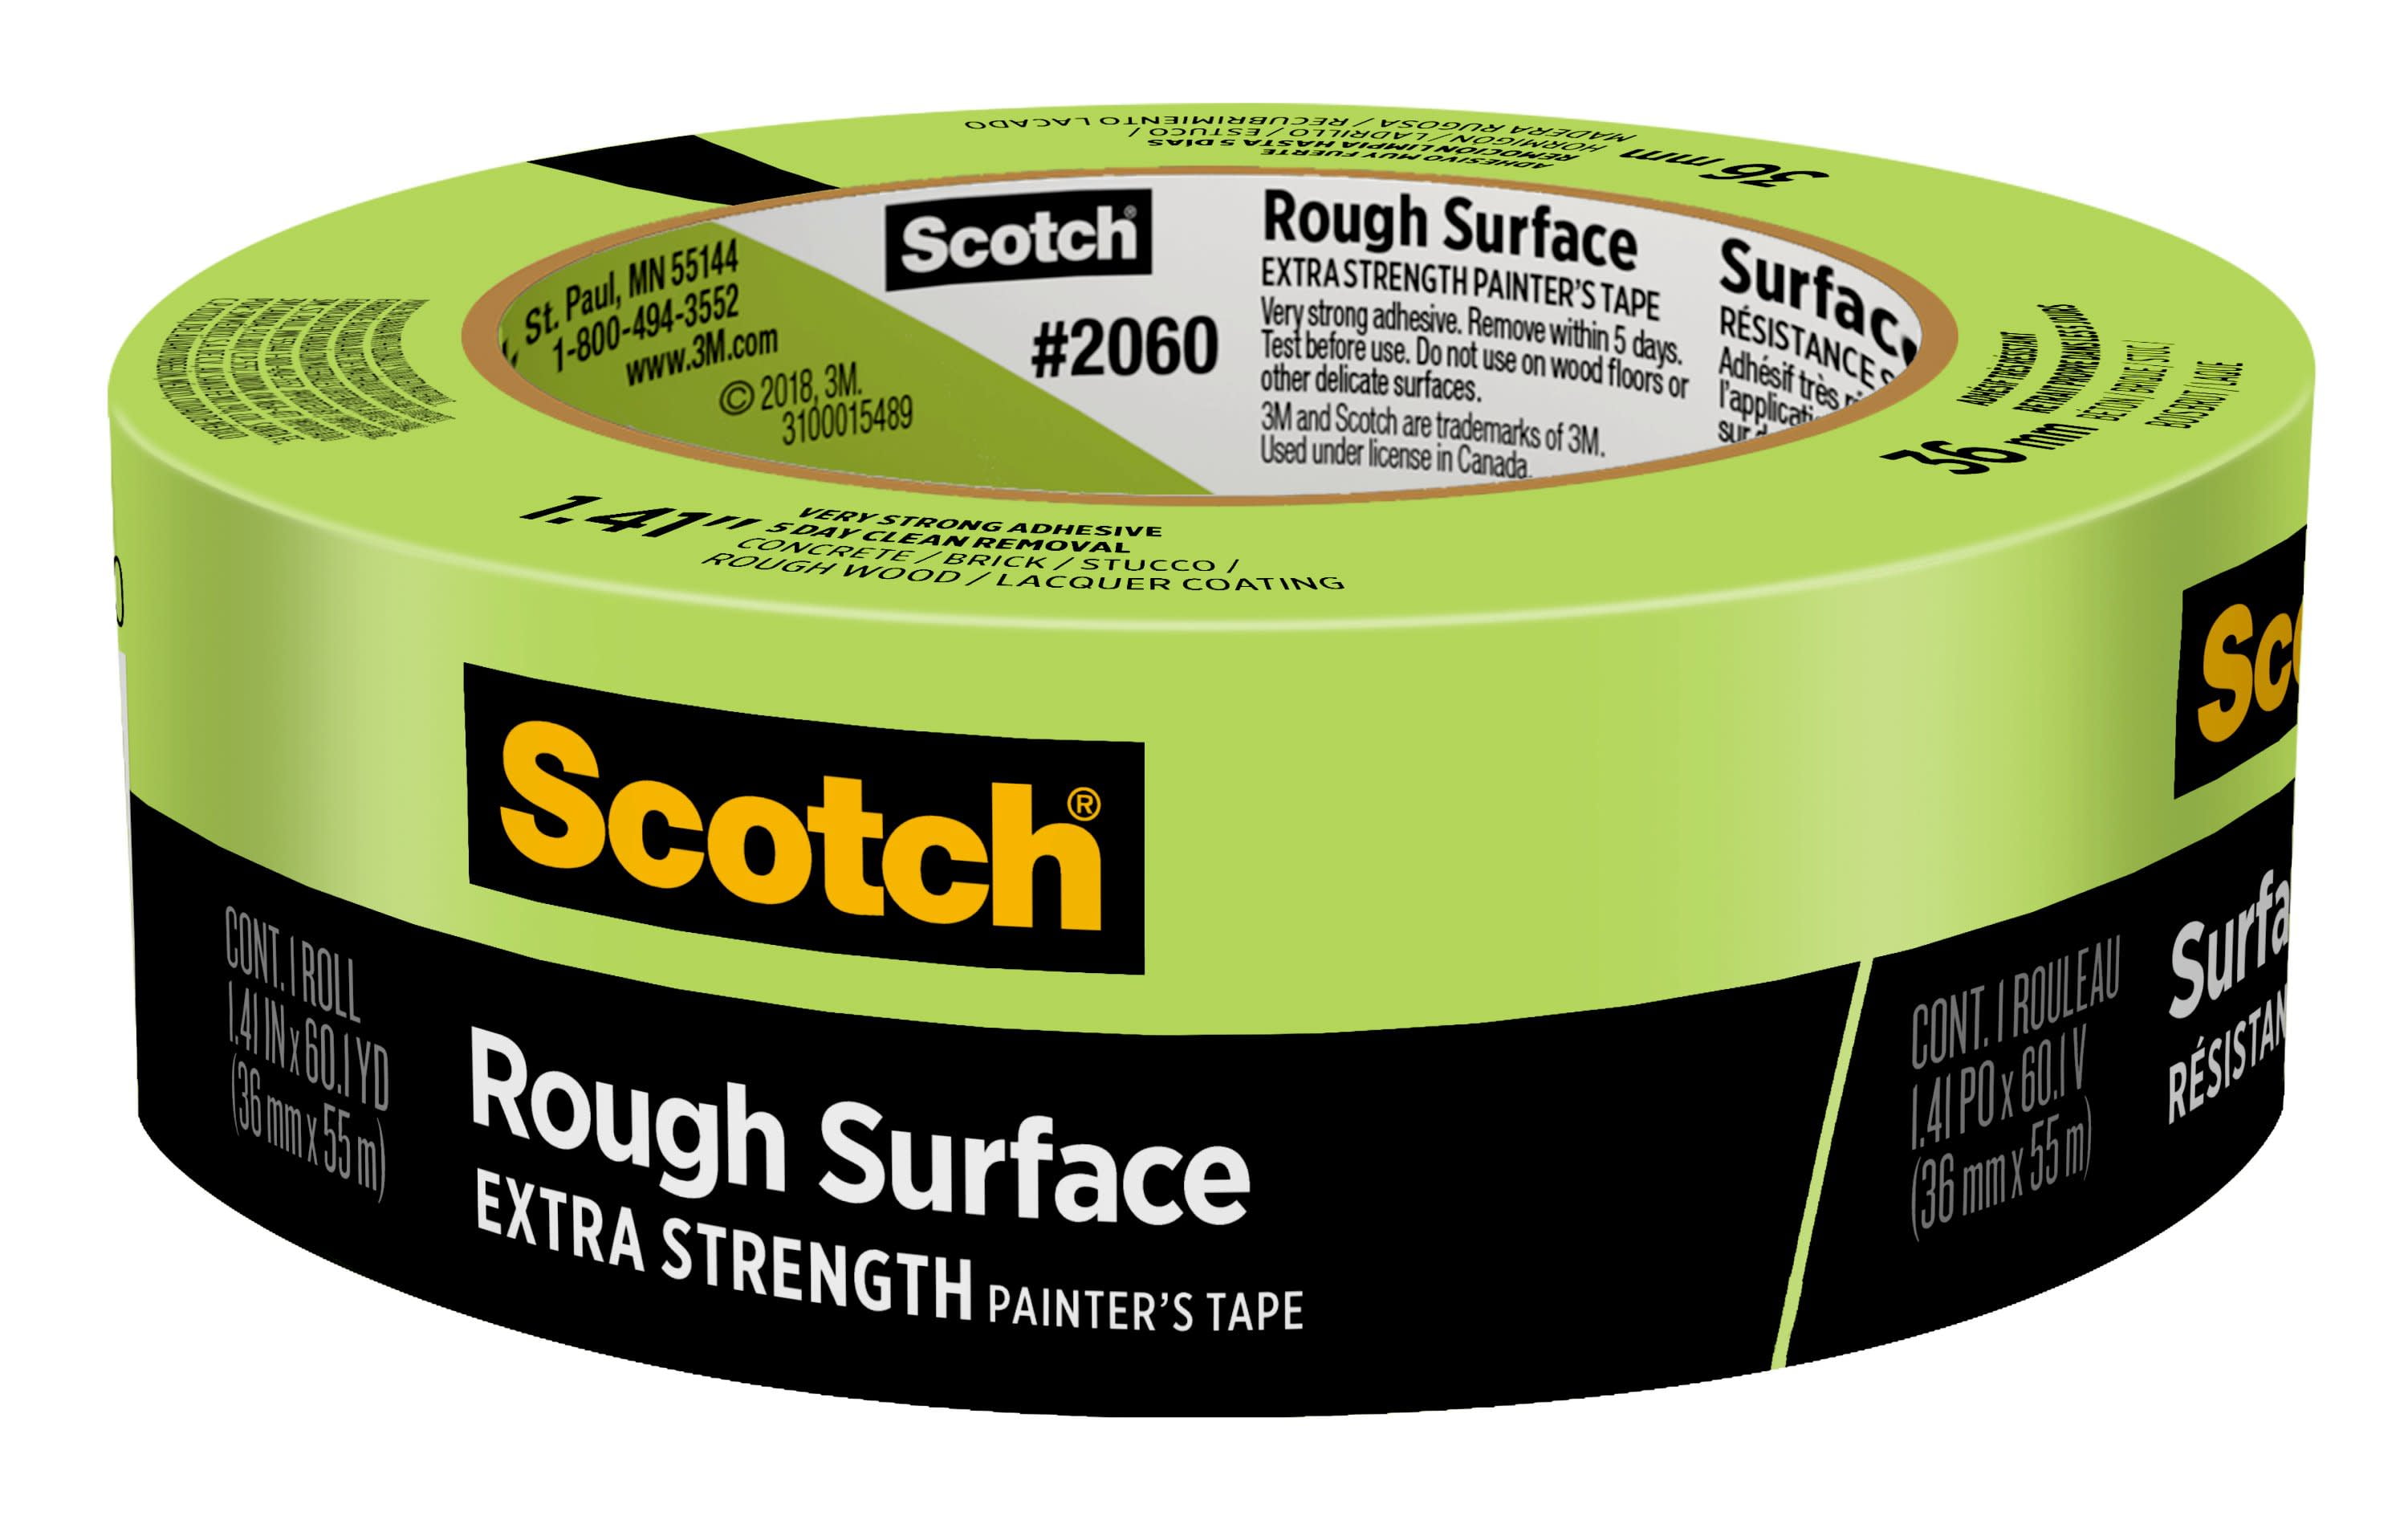 Scotch Rough Surface Painters Tape 2060 0.70 inches x 60 Yards New Version 1 Roll 